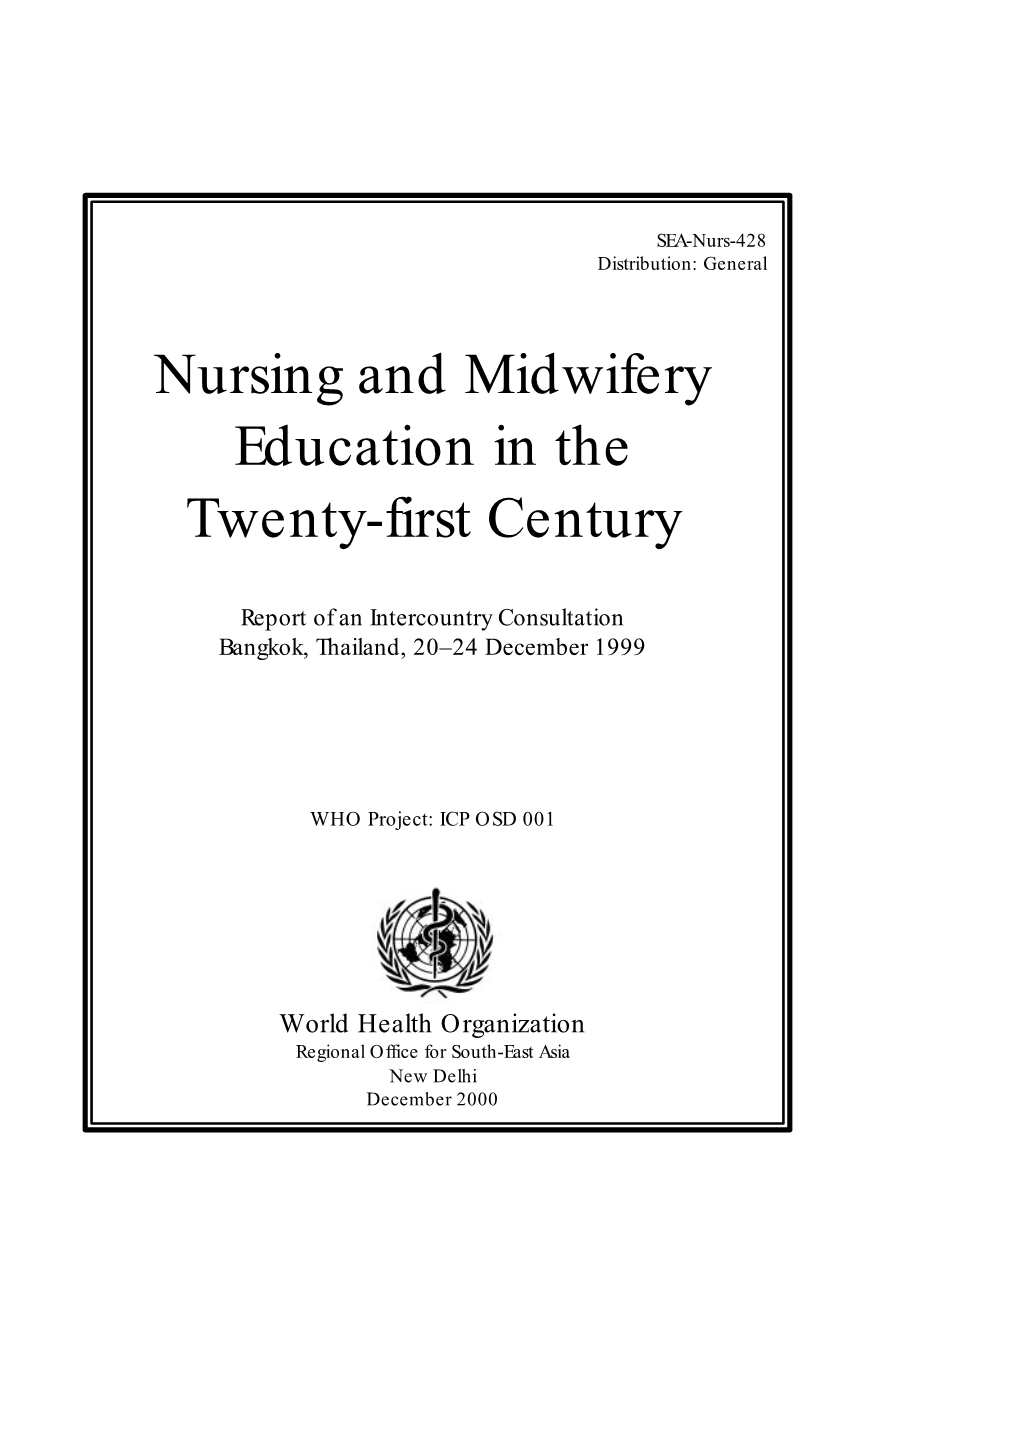 Nursing and Midwifery Education in the Twenty-First Century